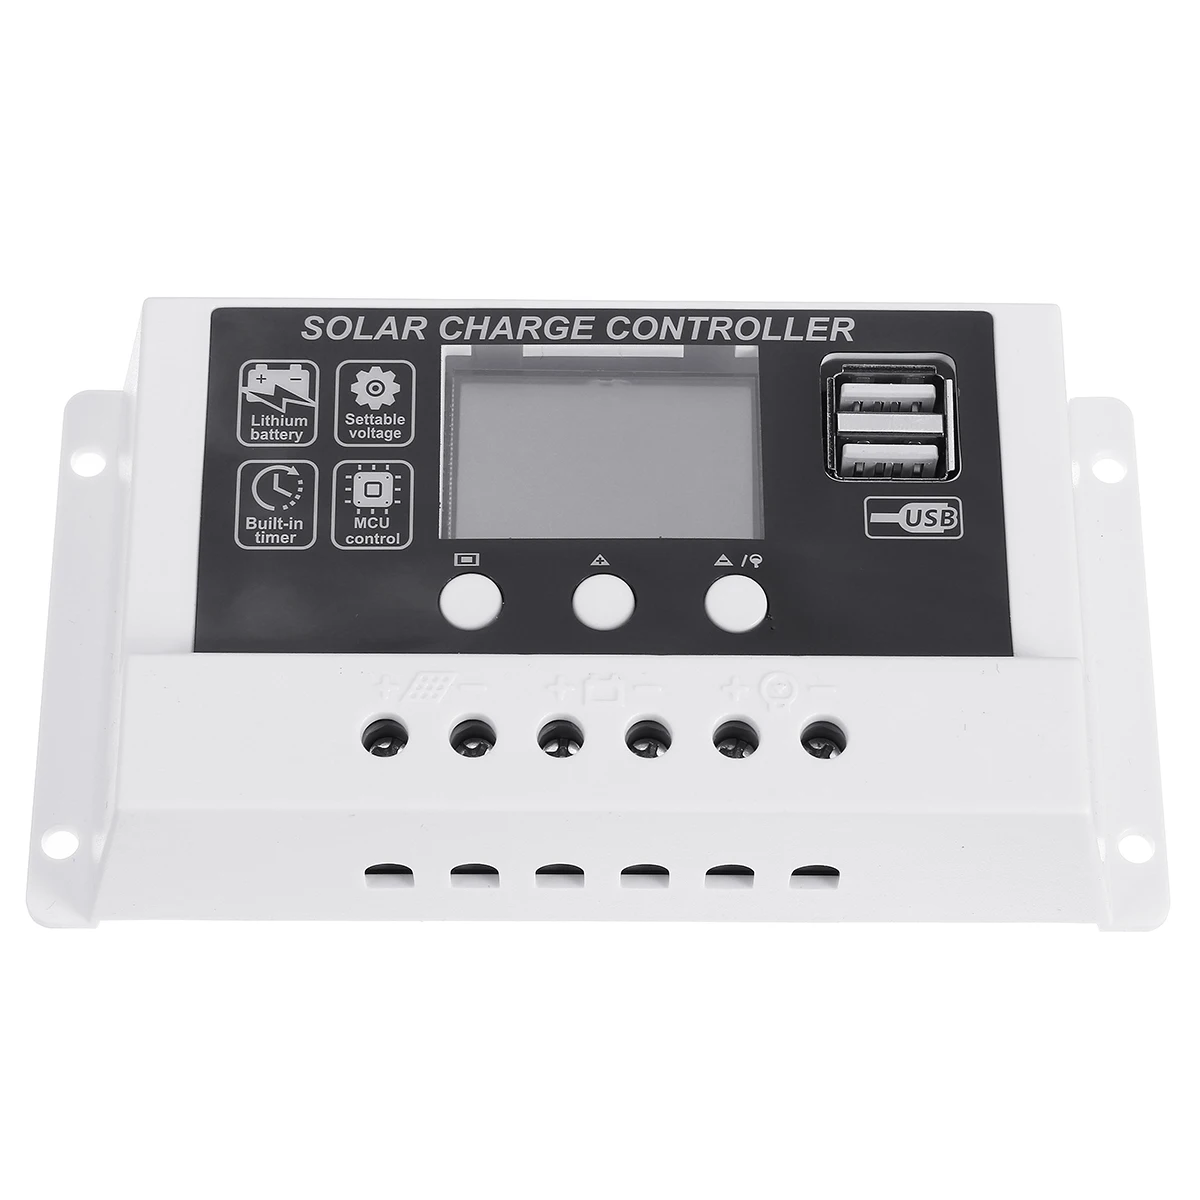 10A /20A /30A Solar Charge Controller 12V 24V Auto PWM LCD Dual USB 5V Output Solar Cell Panel Regulator PV Home Battery Charger